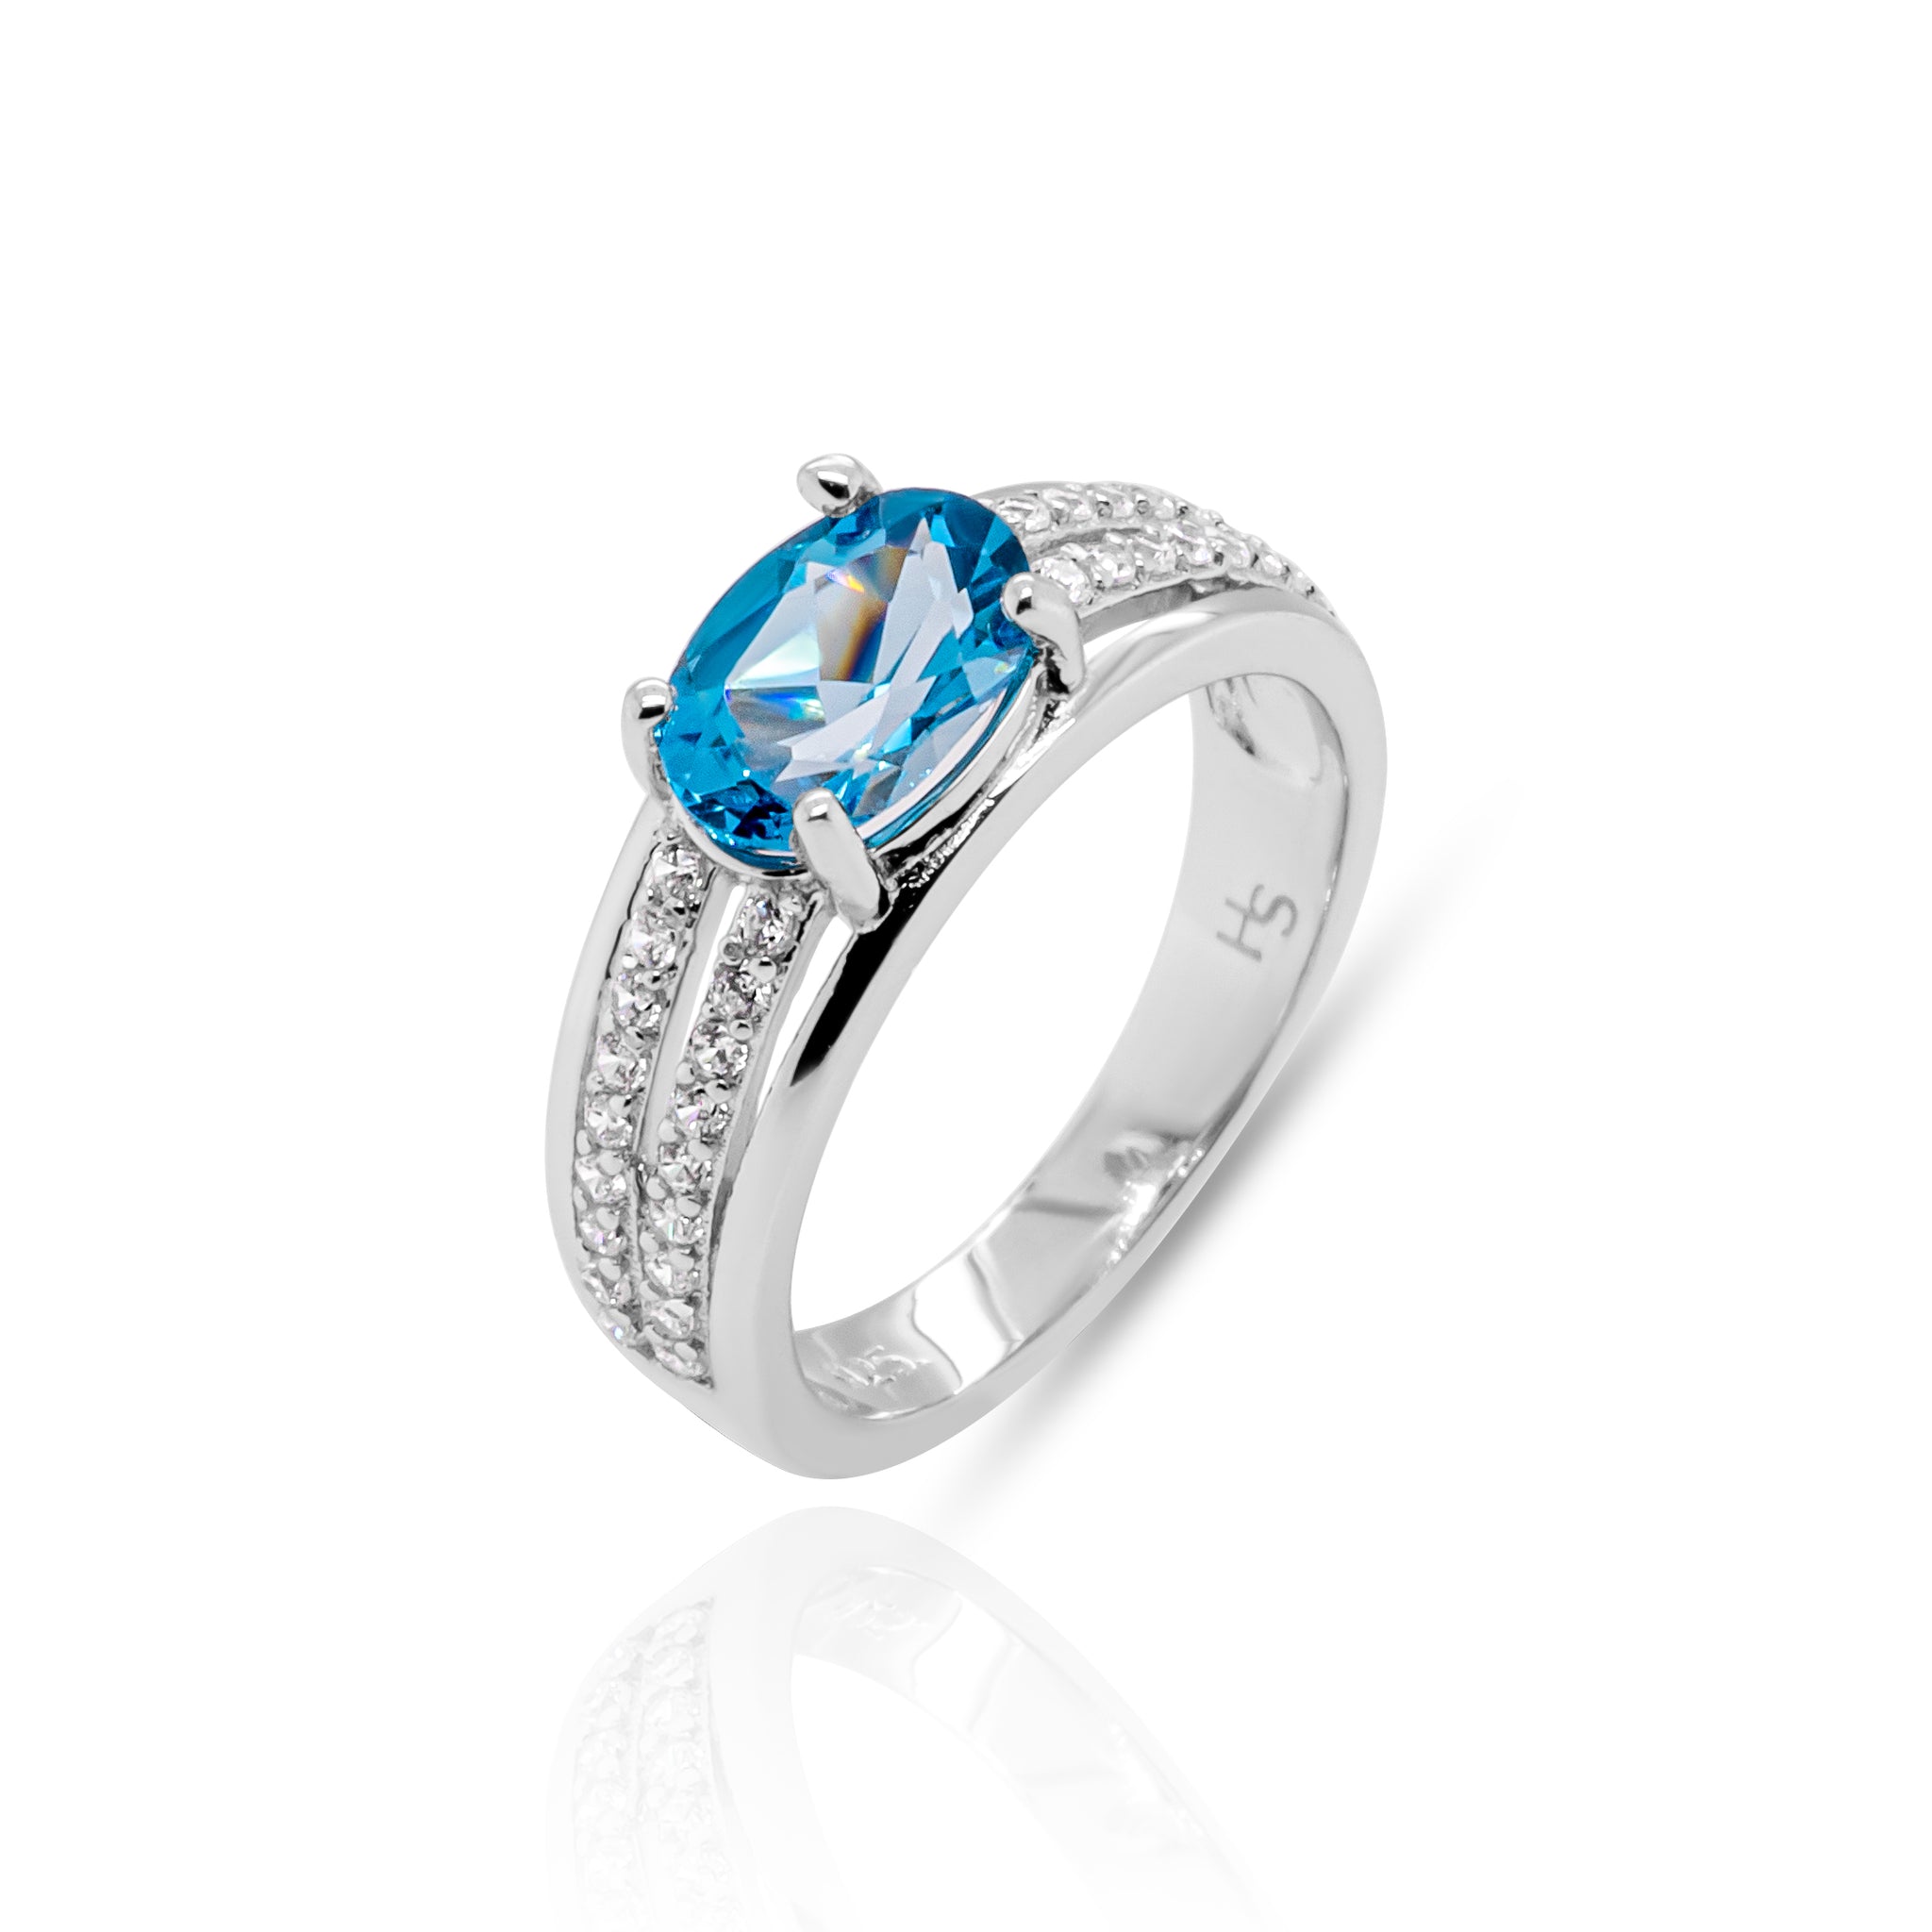 Ruka London Blue Topaz Ring in Sterling Silver - Heron and Swan